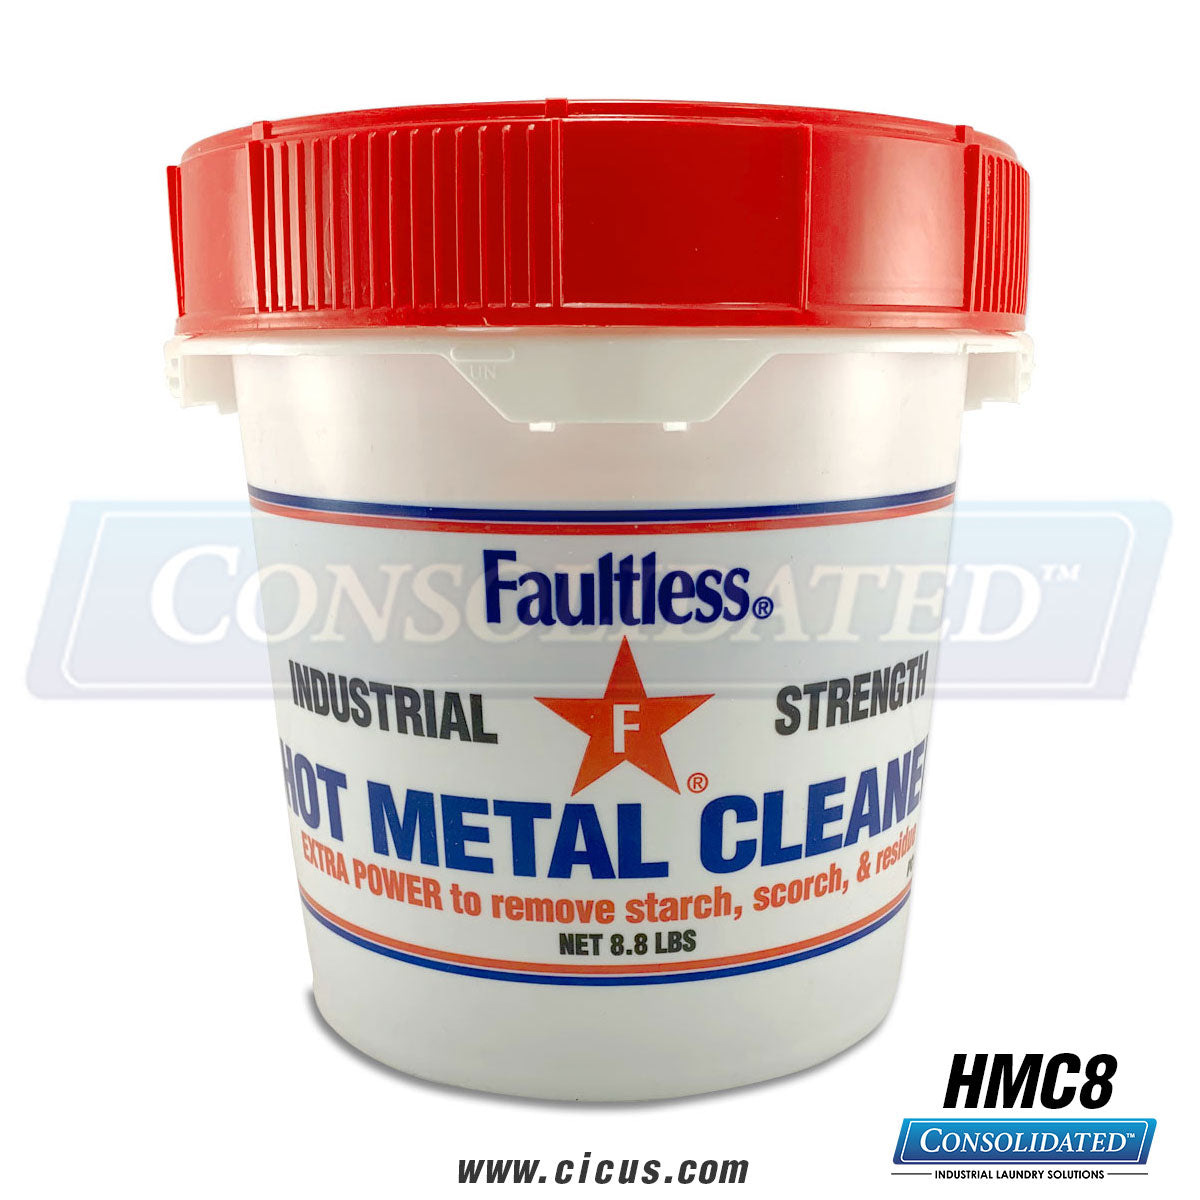 Faultless Industrial Strength Hot Metal Cleaner - Cicus.com - Industrial Laundry Textiles and Supplies